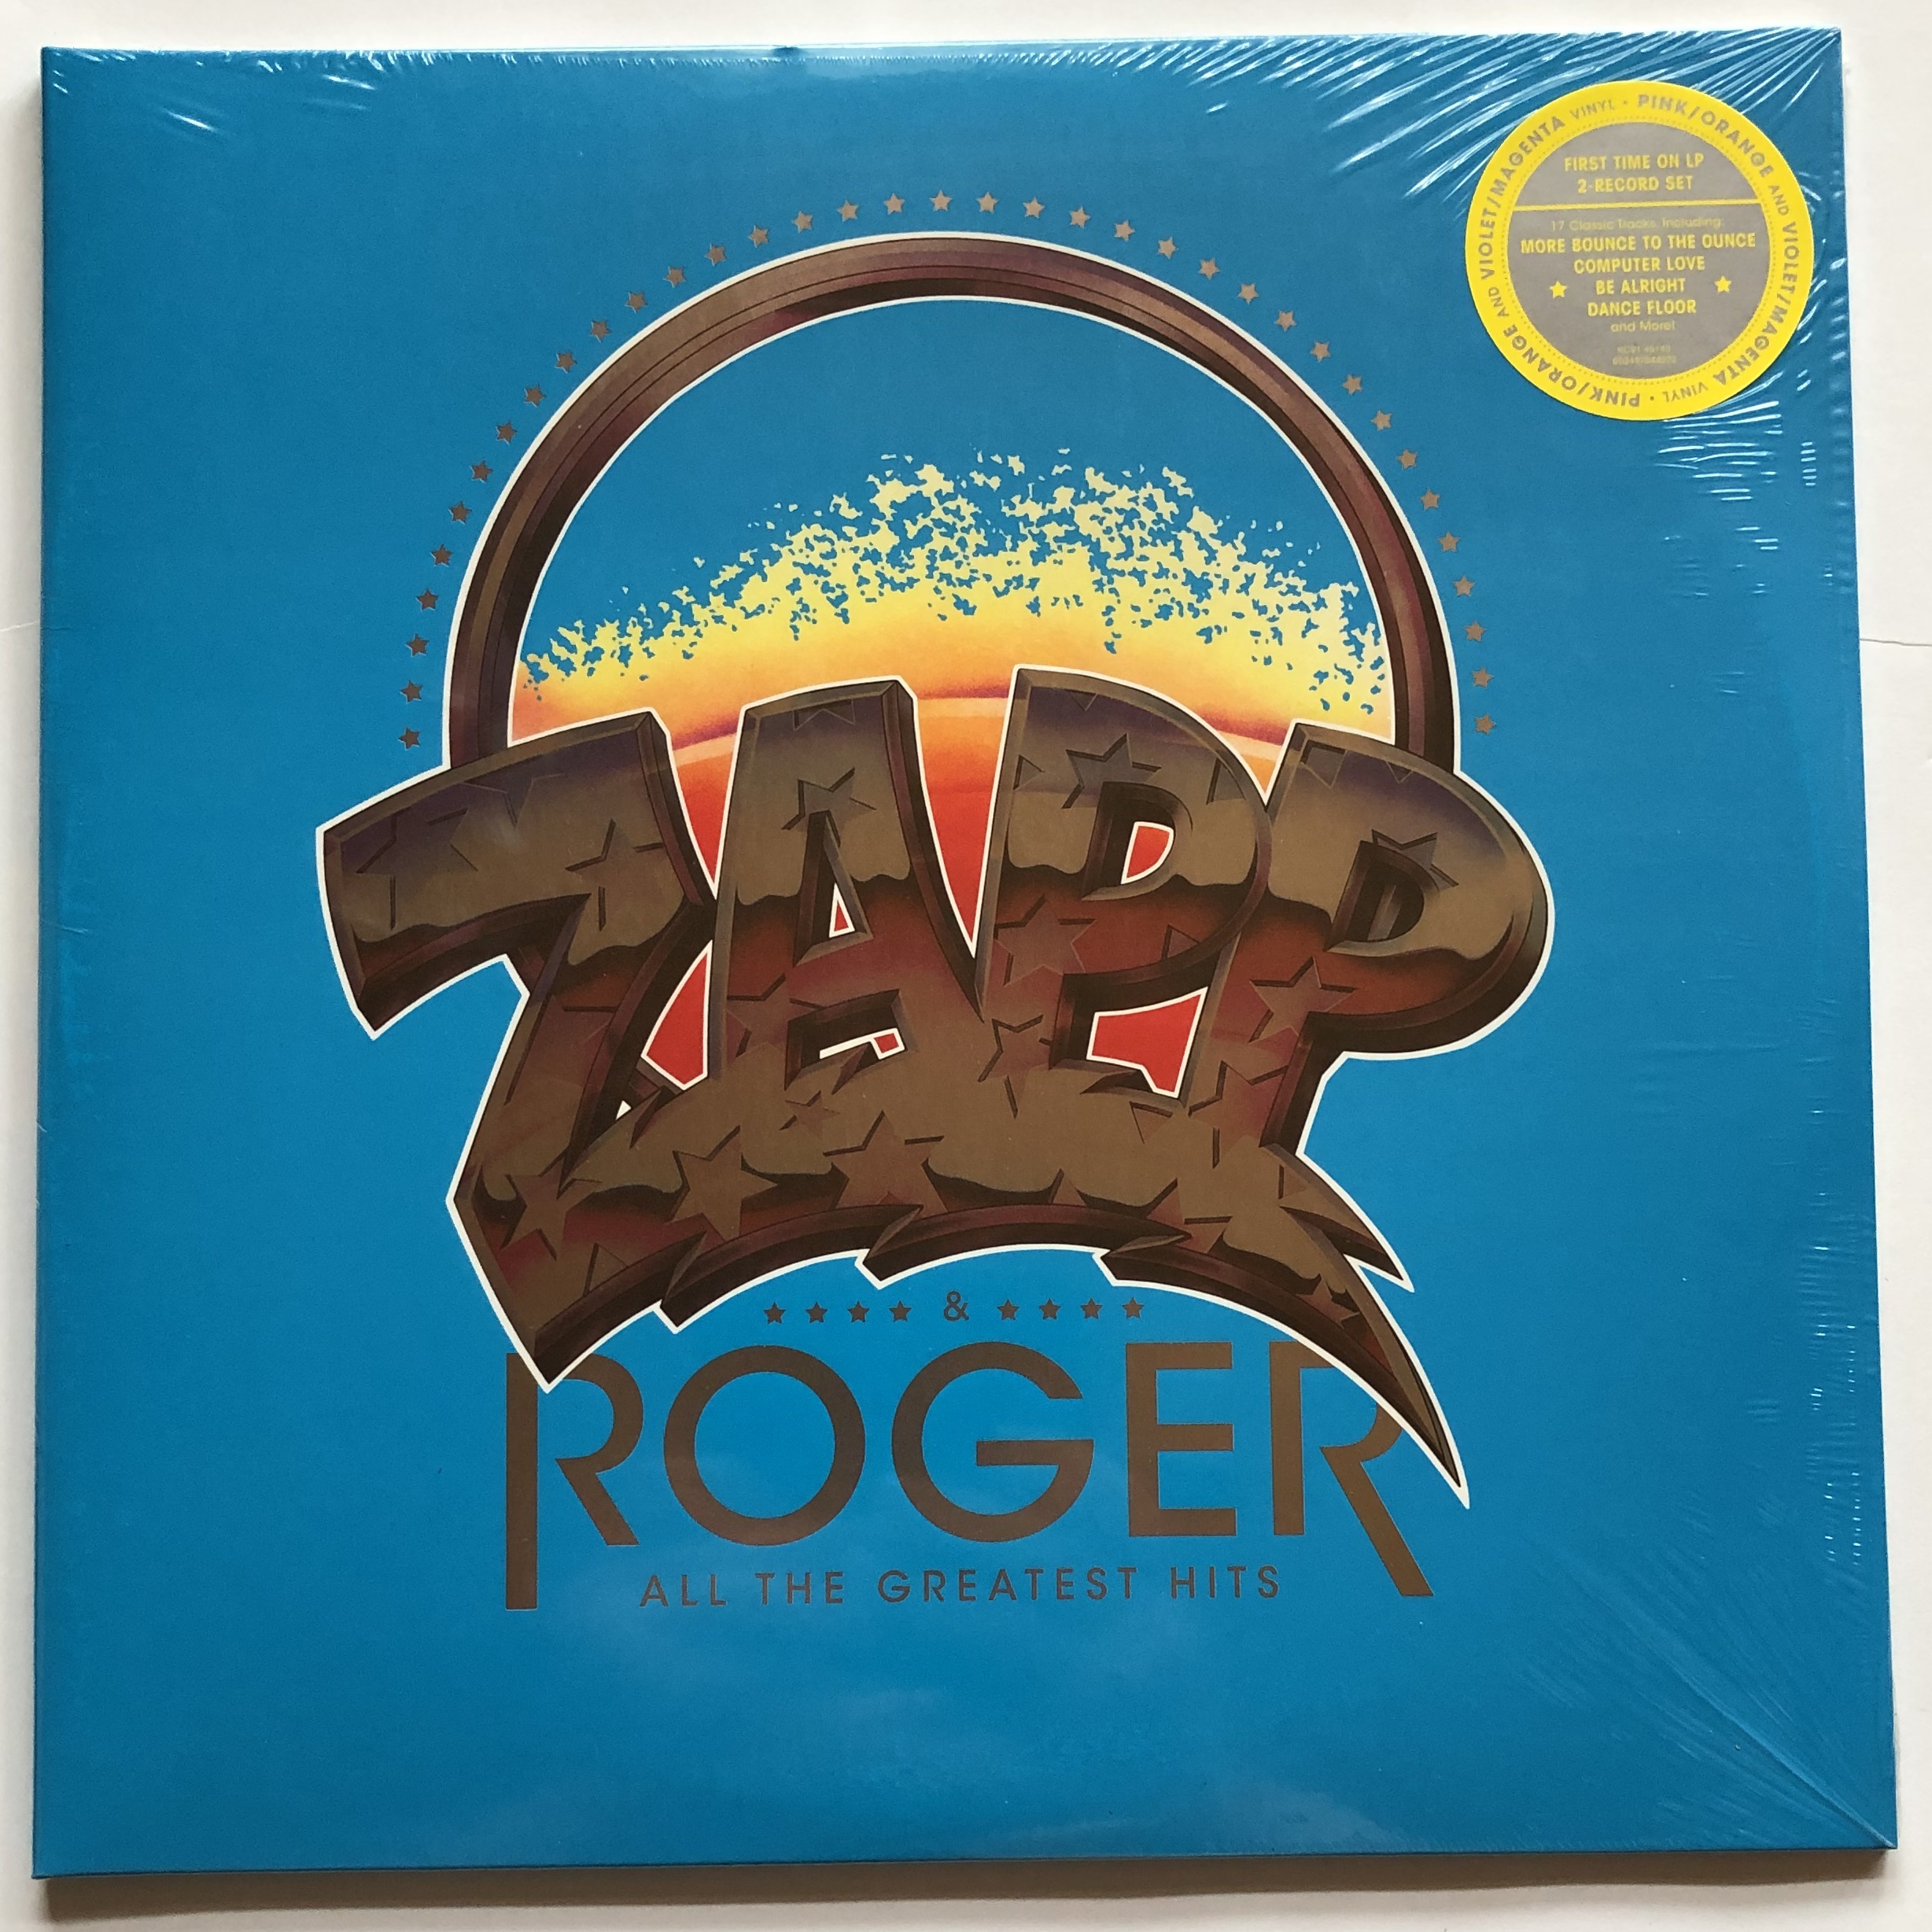 Zapp & Roger – All The Greatest Hits (1993, Vinyl) - Discogs